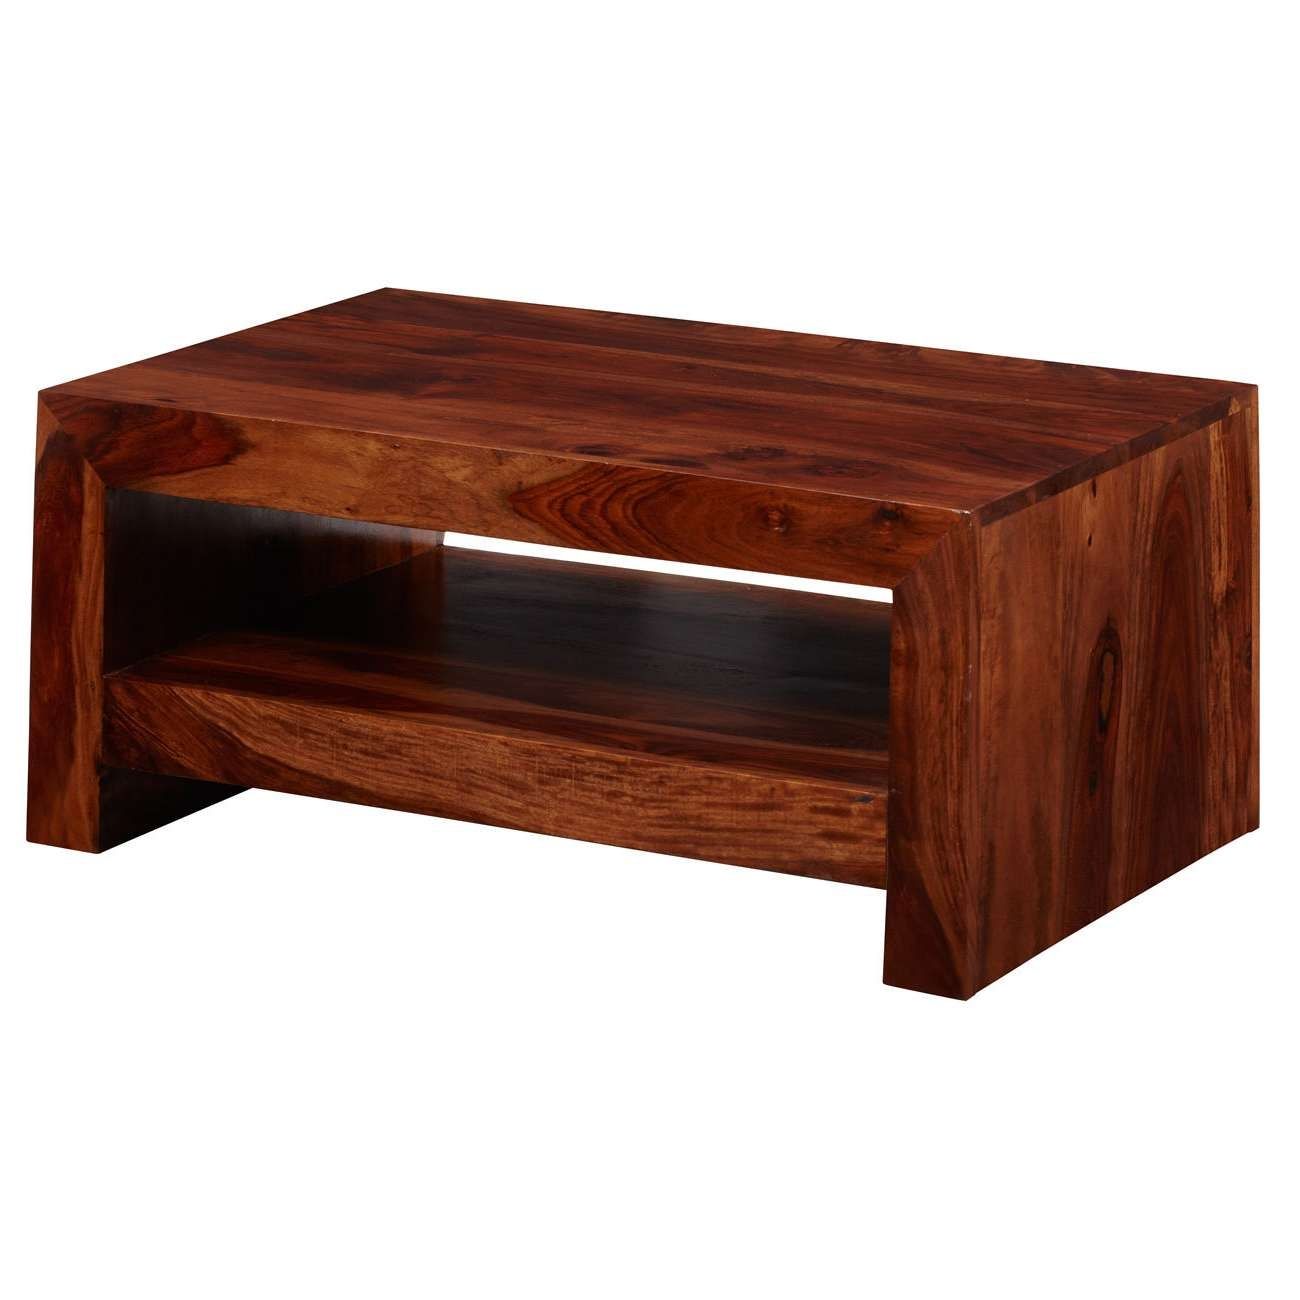 Fashionable Dark Wood Coffee Tables With Regard To Coffee Table. Appealing Dark Wood Coffee Table: Enchanting Dark (Gallery 7 of 20)